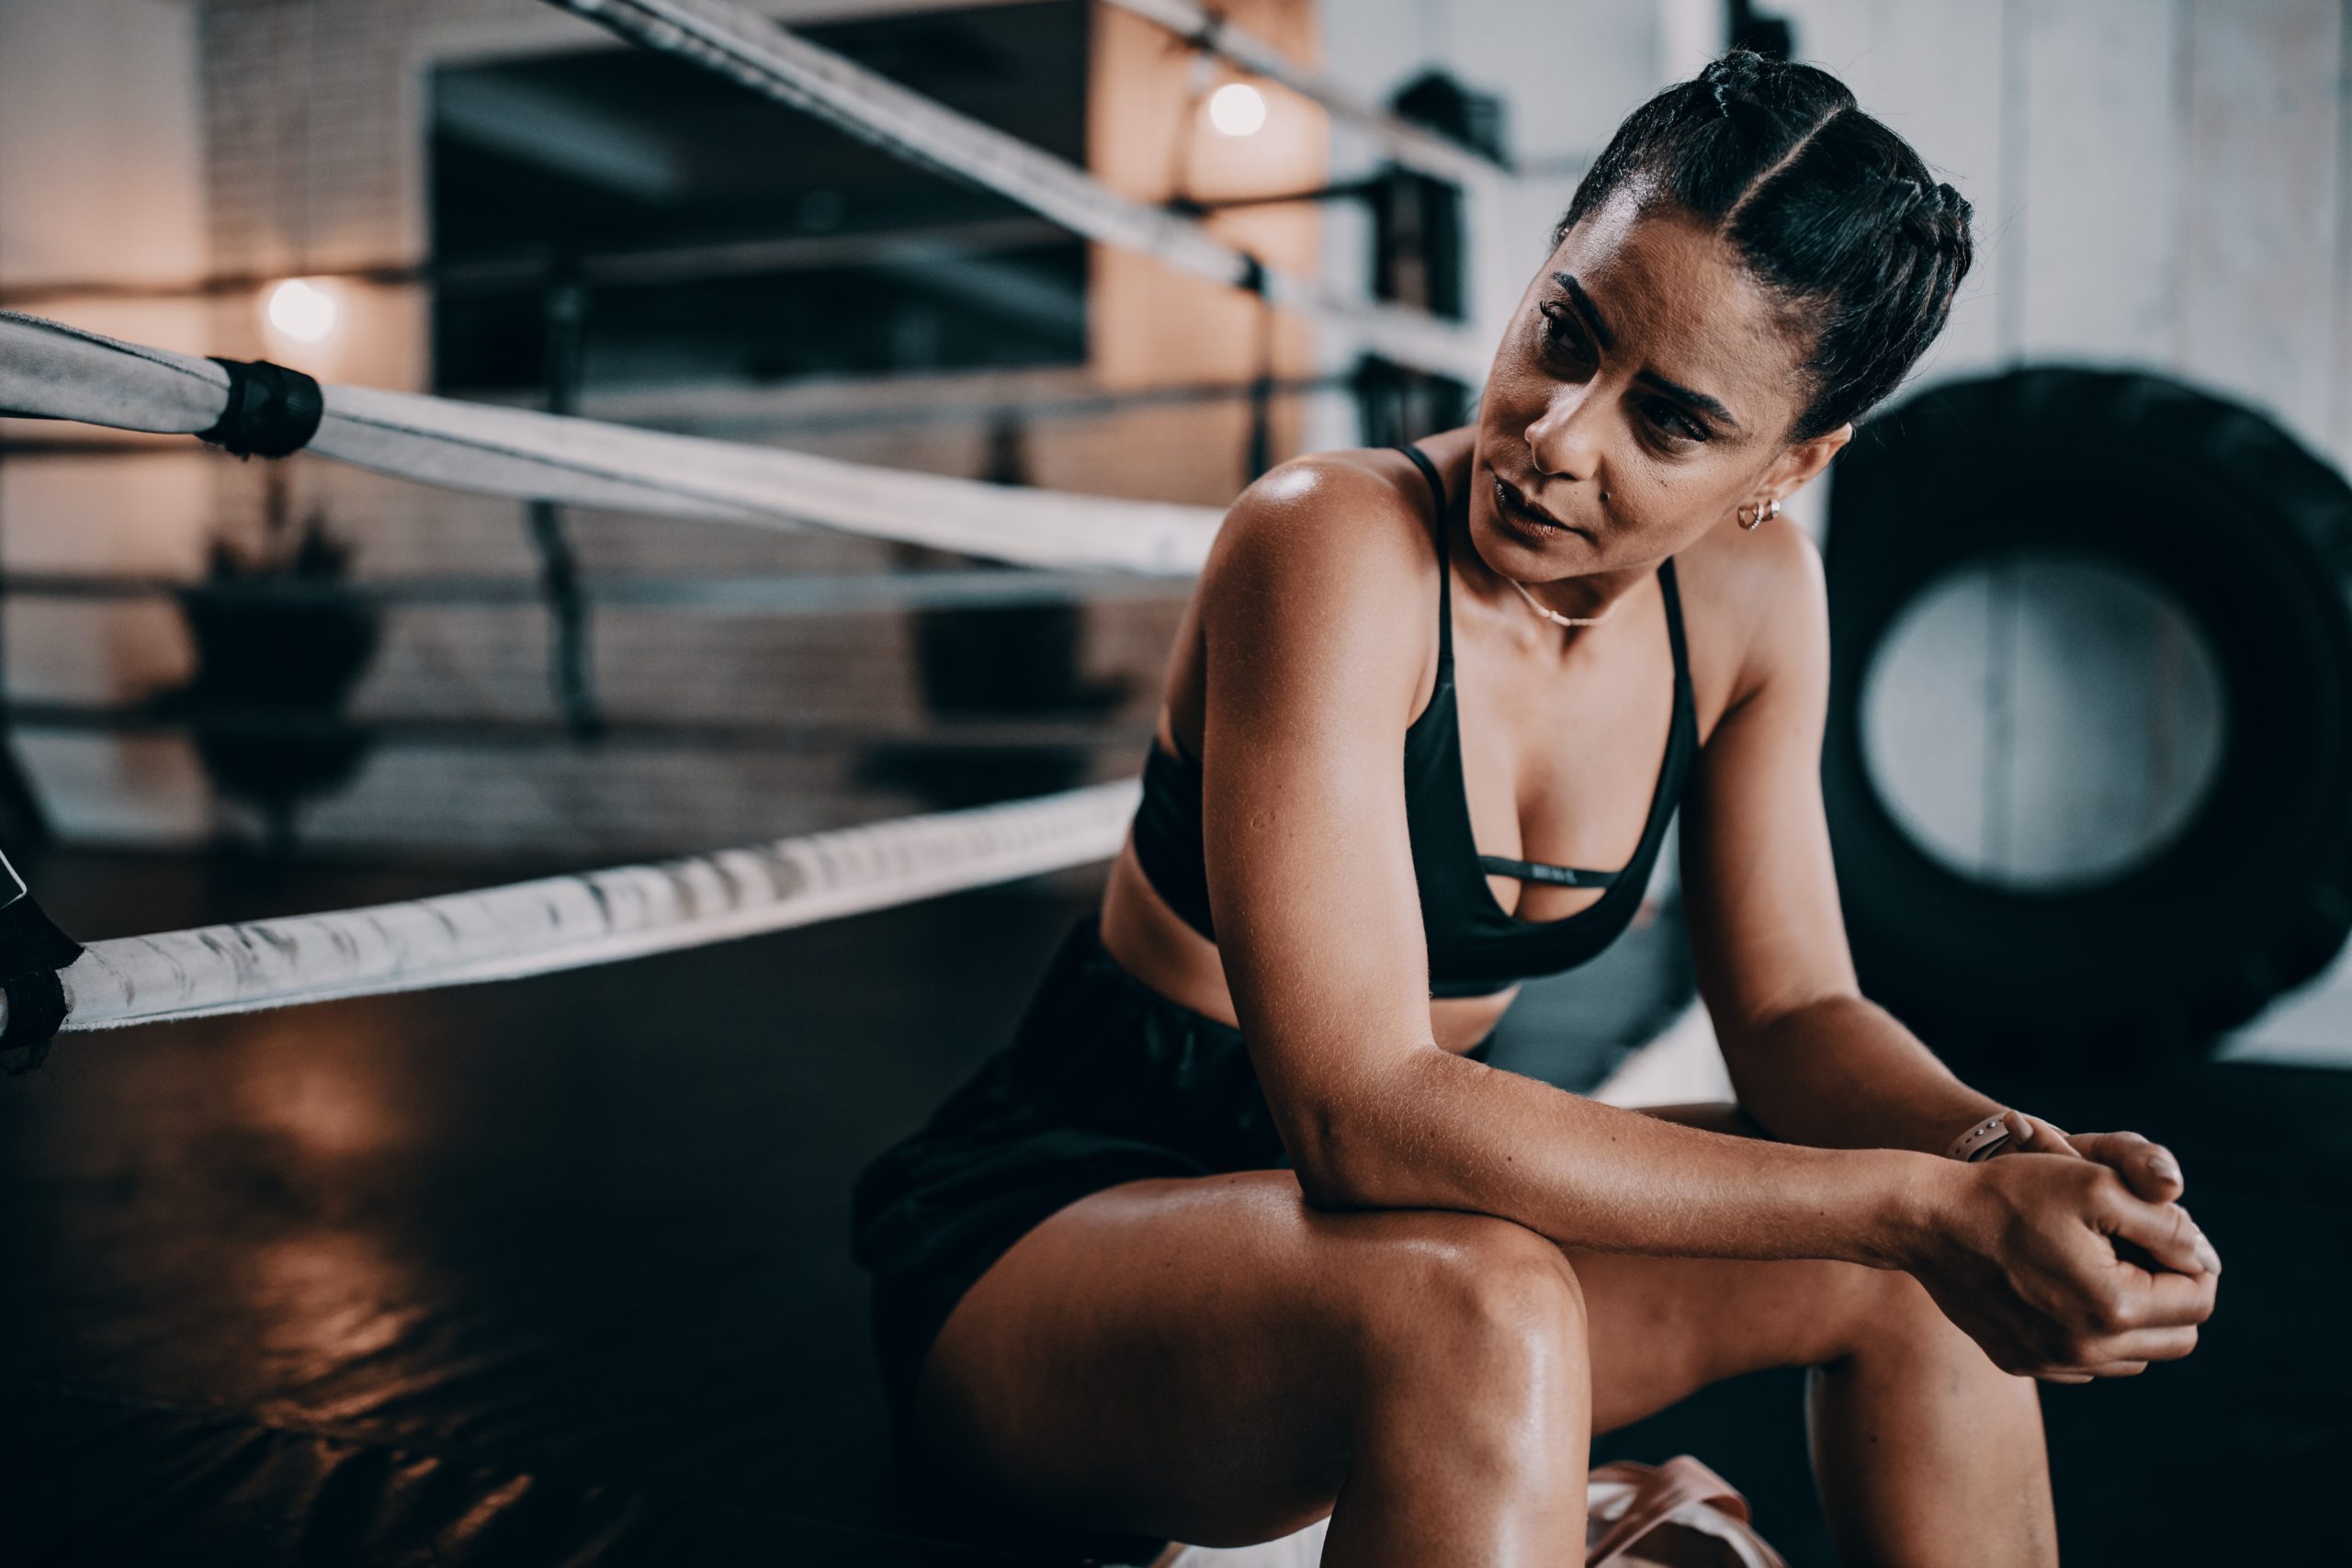 how to get started in women’s mma